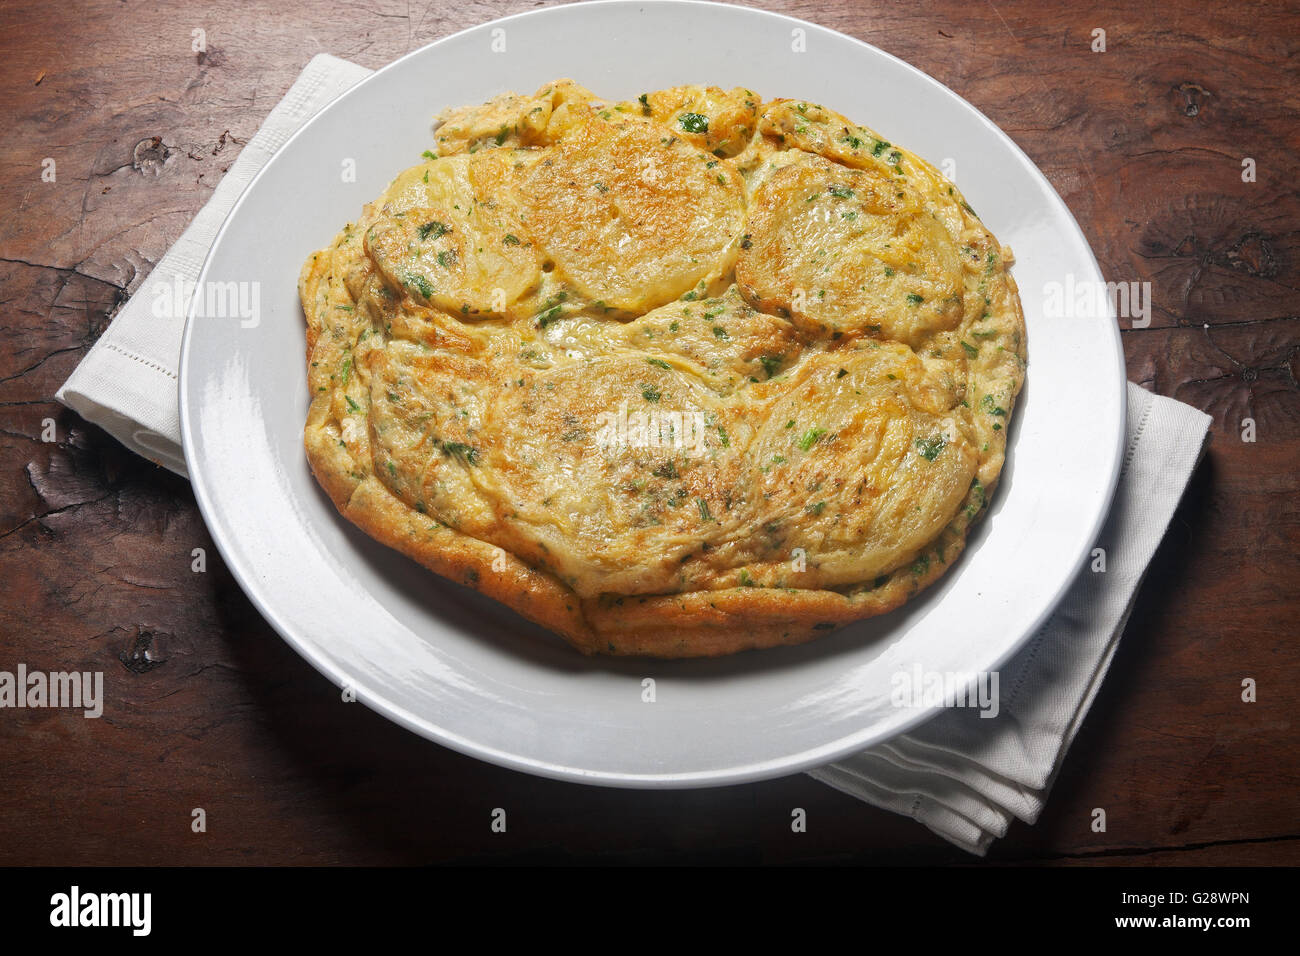 Potatoes omelette on a wooden table Stock Photo